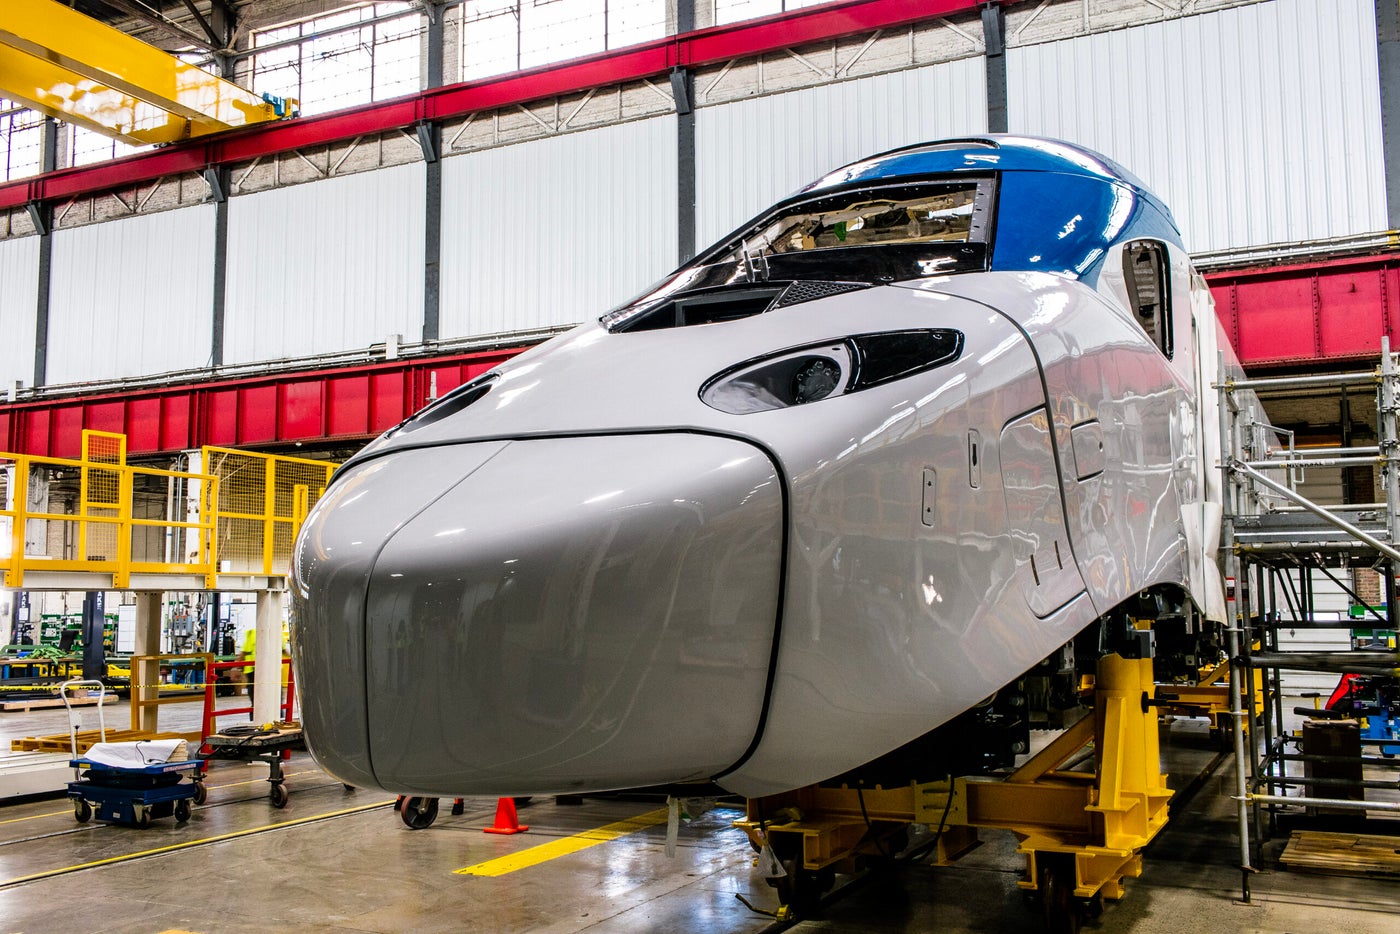 The brand new Amtrak Acela fleet is coming; Here's a first look inside the new trains